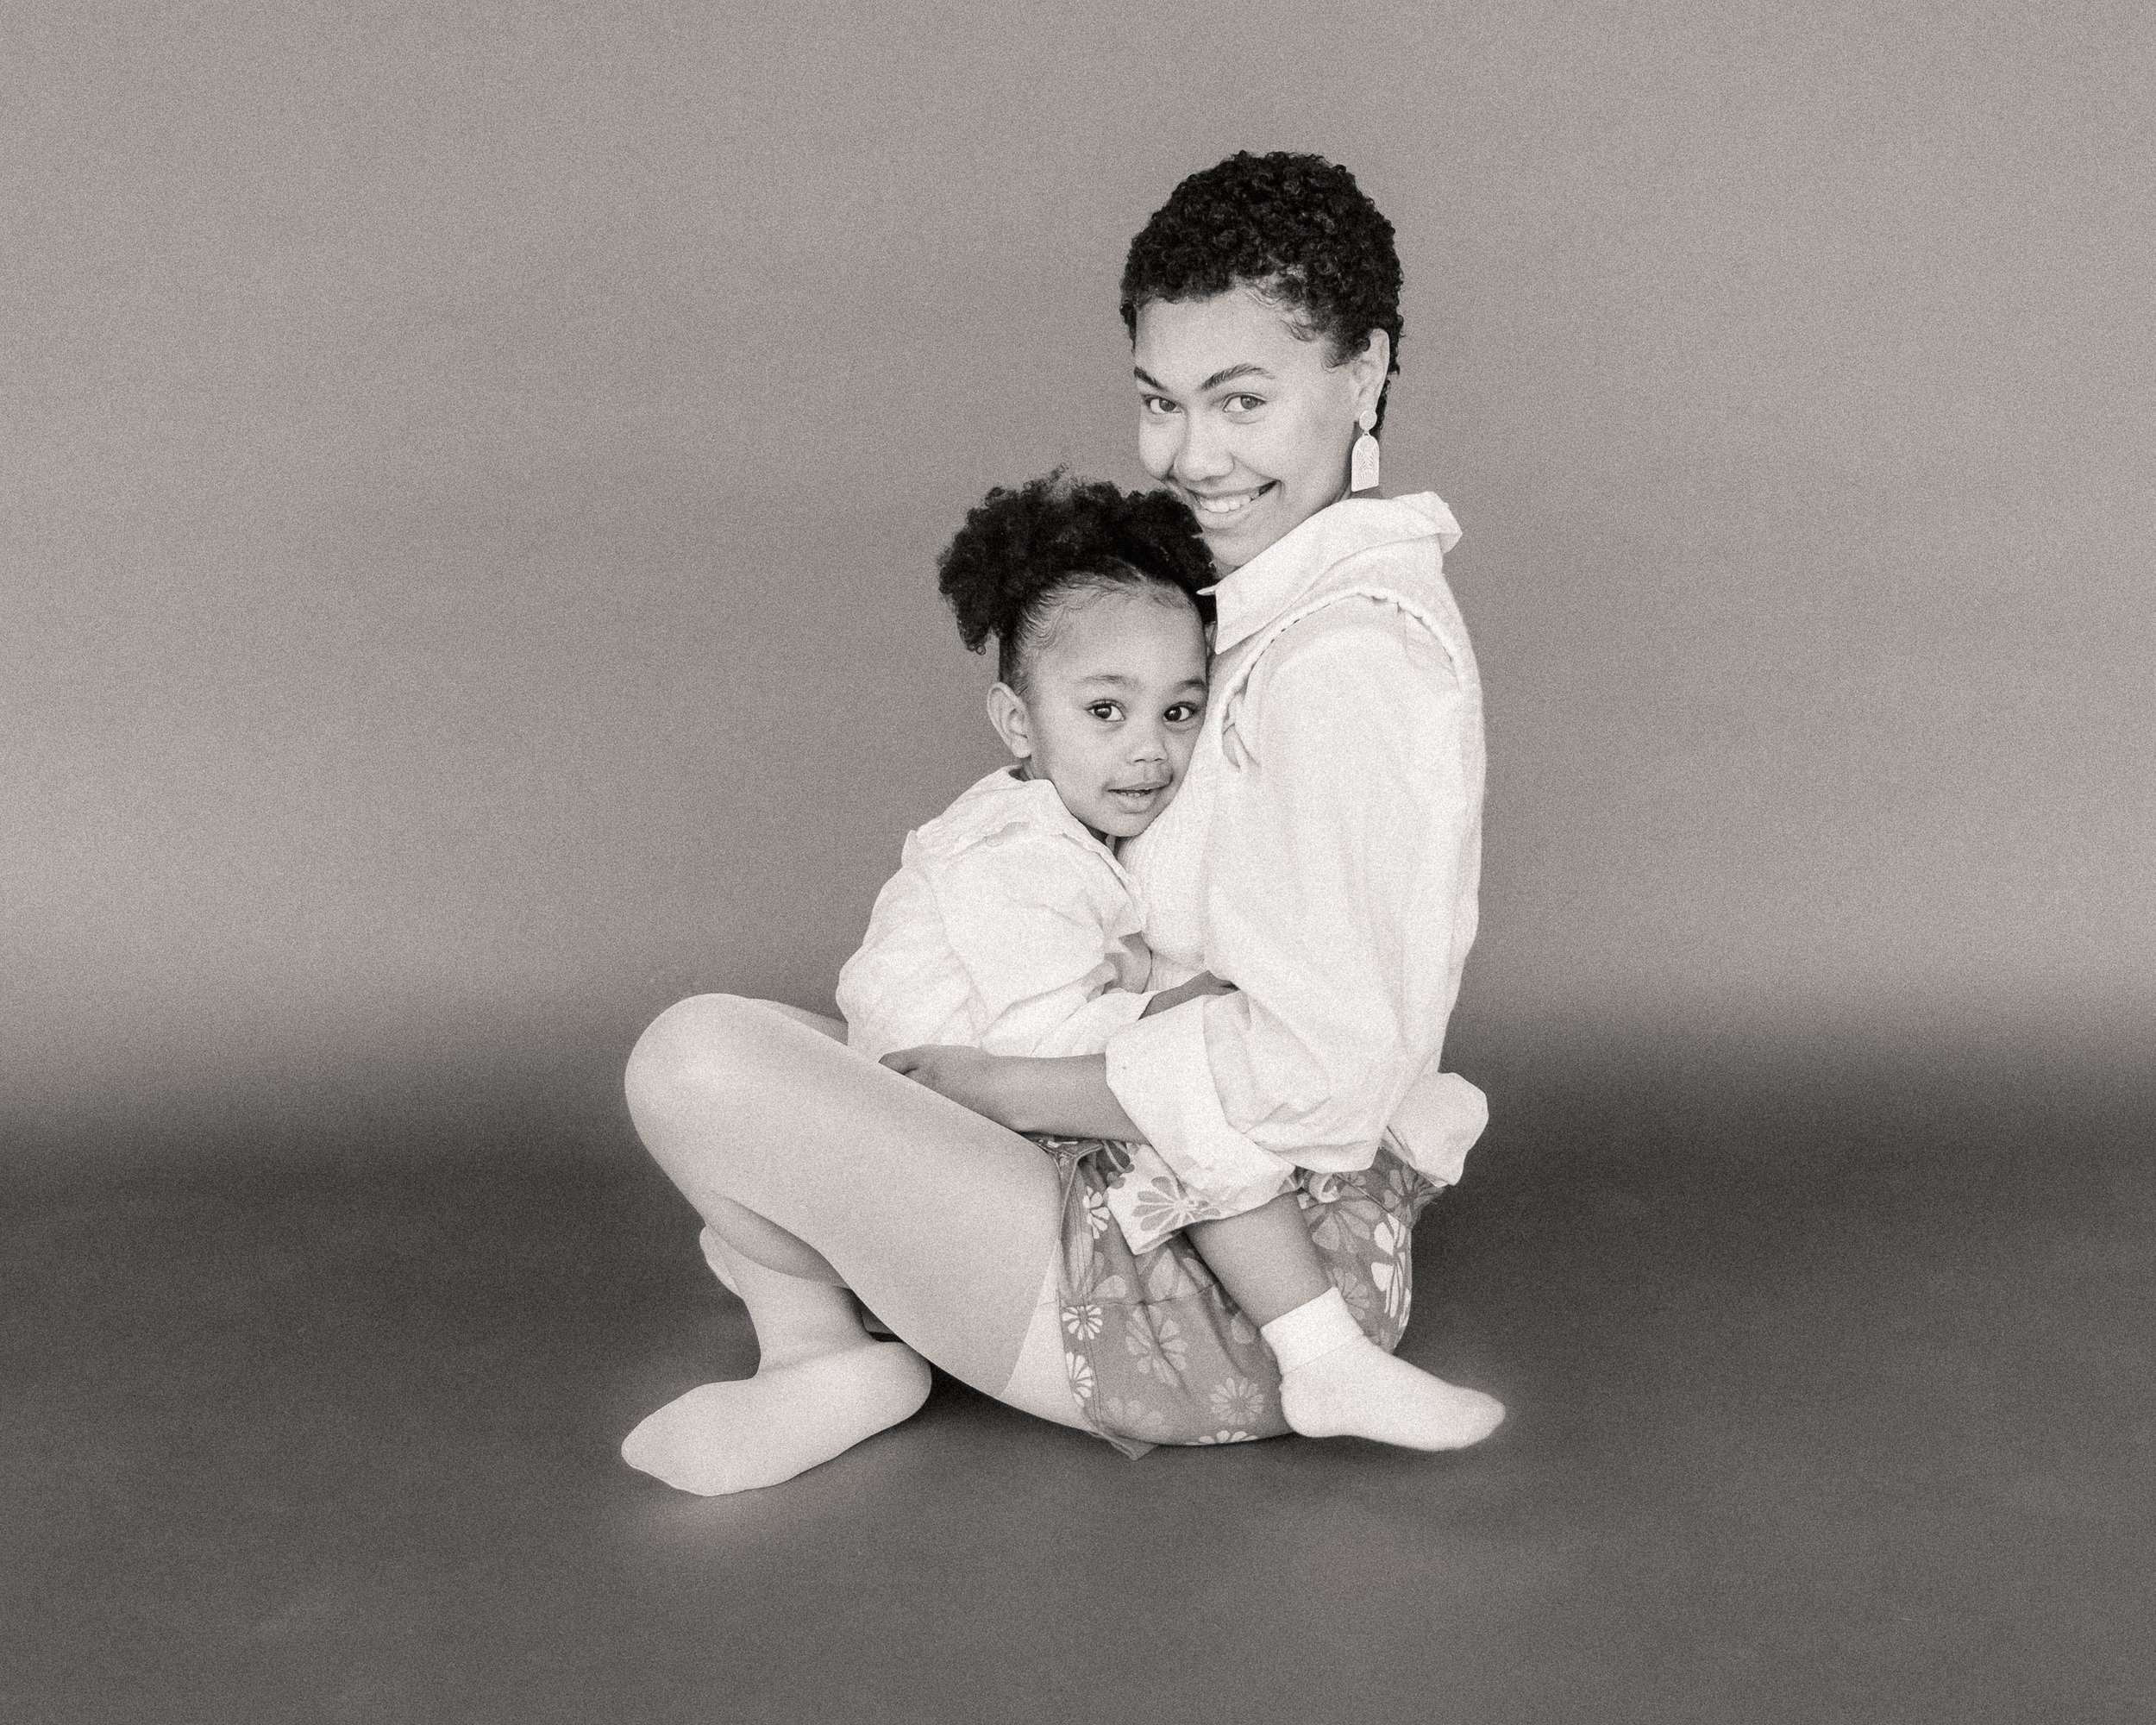 the que studio - mommy and me - columbus portraits